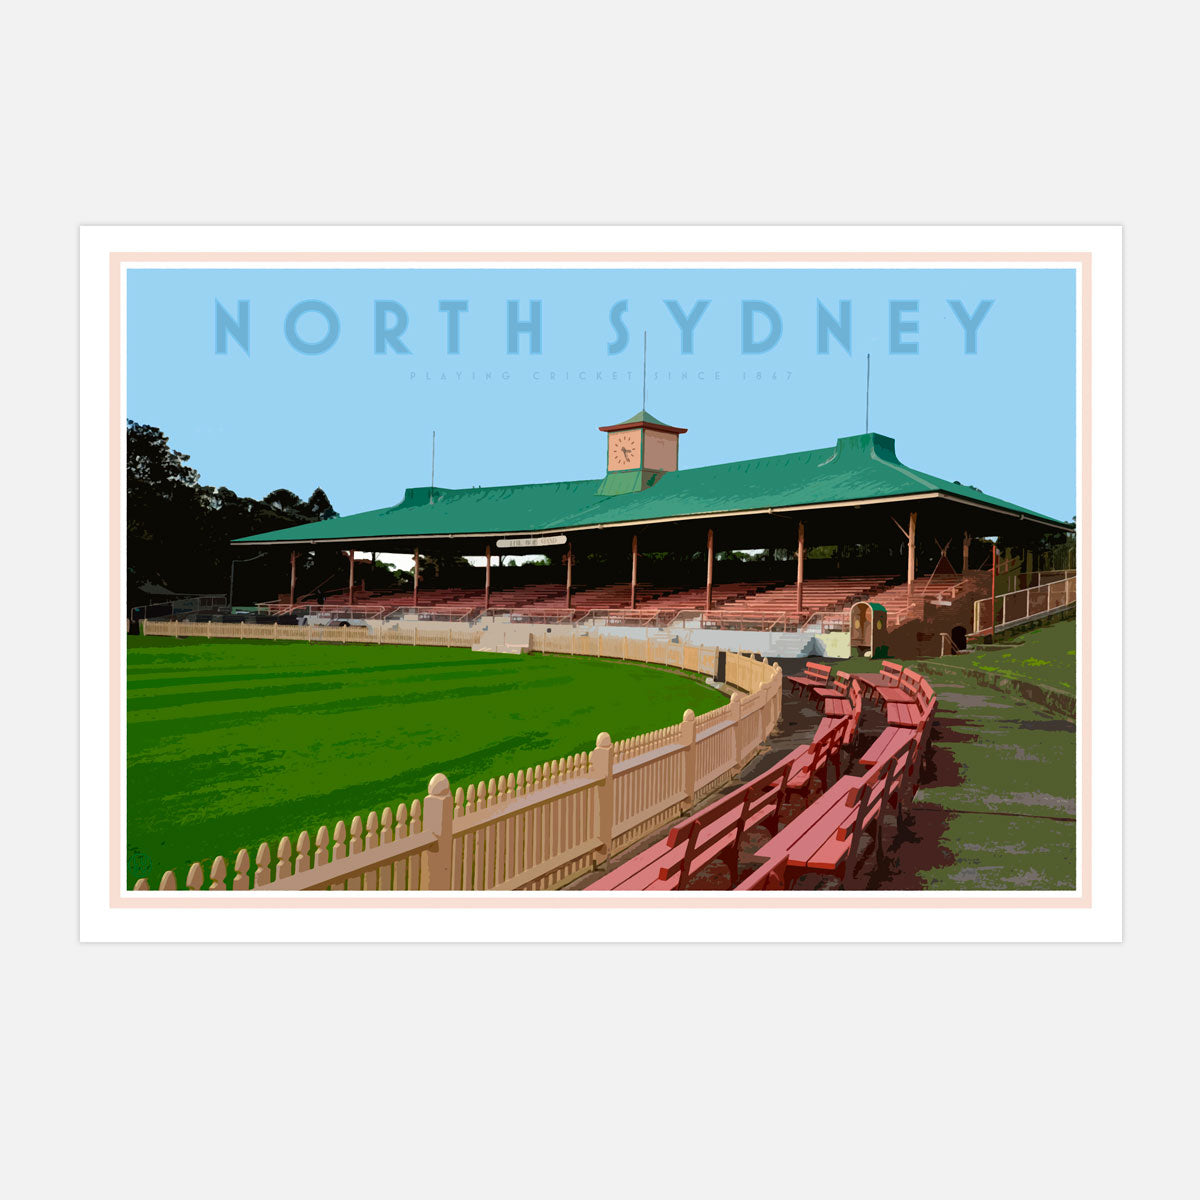 North Sydney vintage travel style poster by places we luv